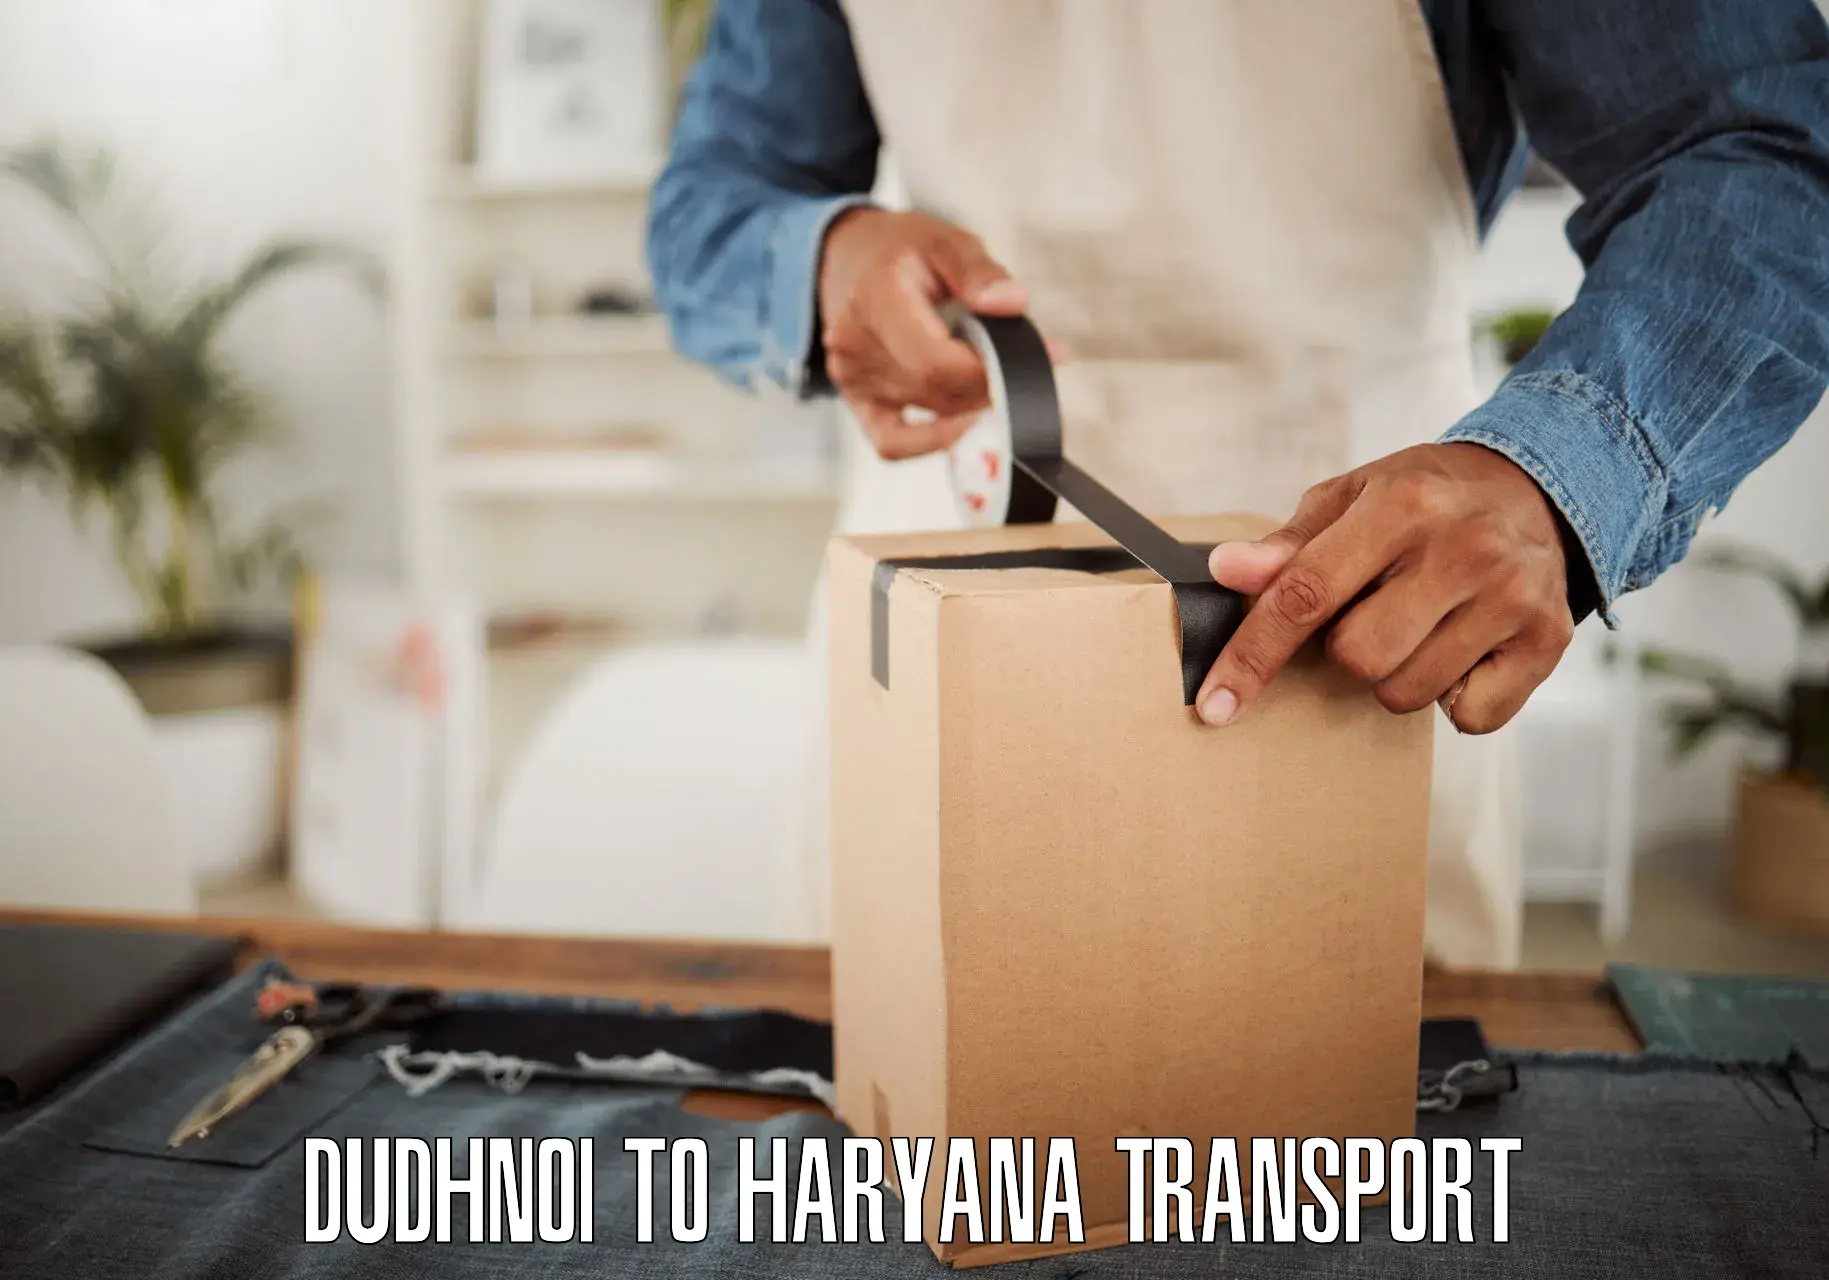 Transport shared services Dudhnoi to Gurugram